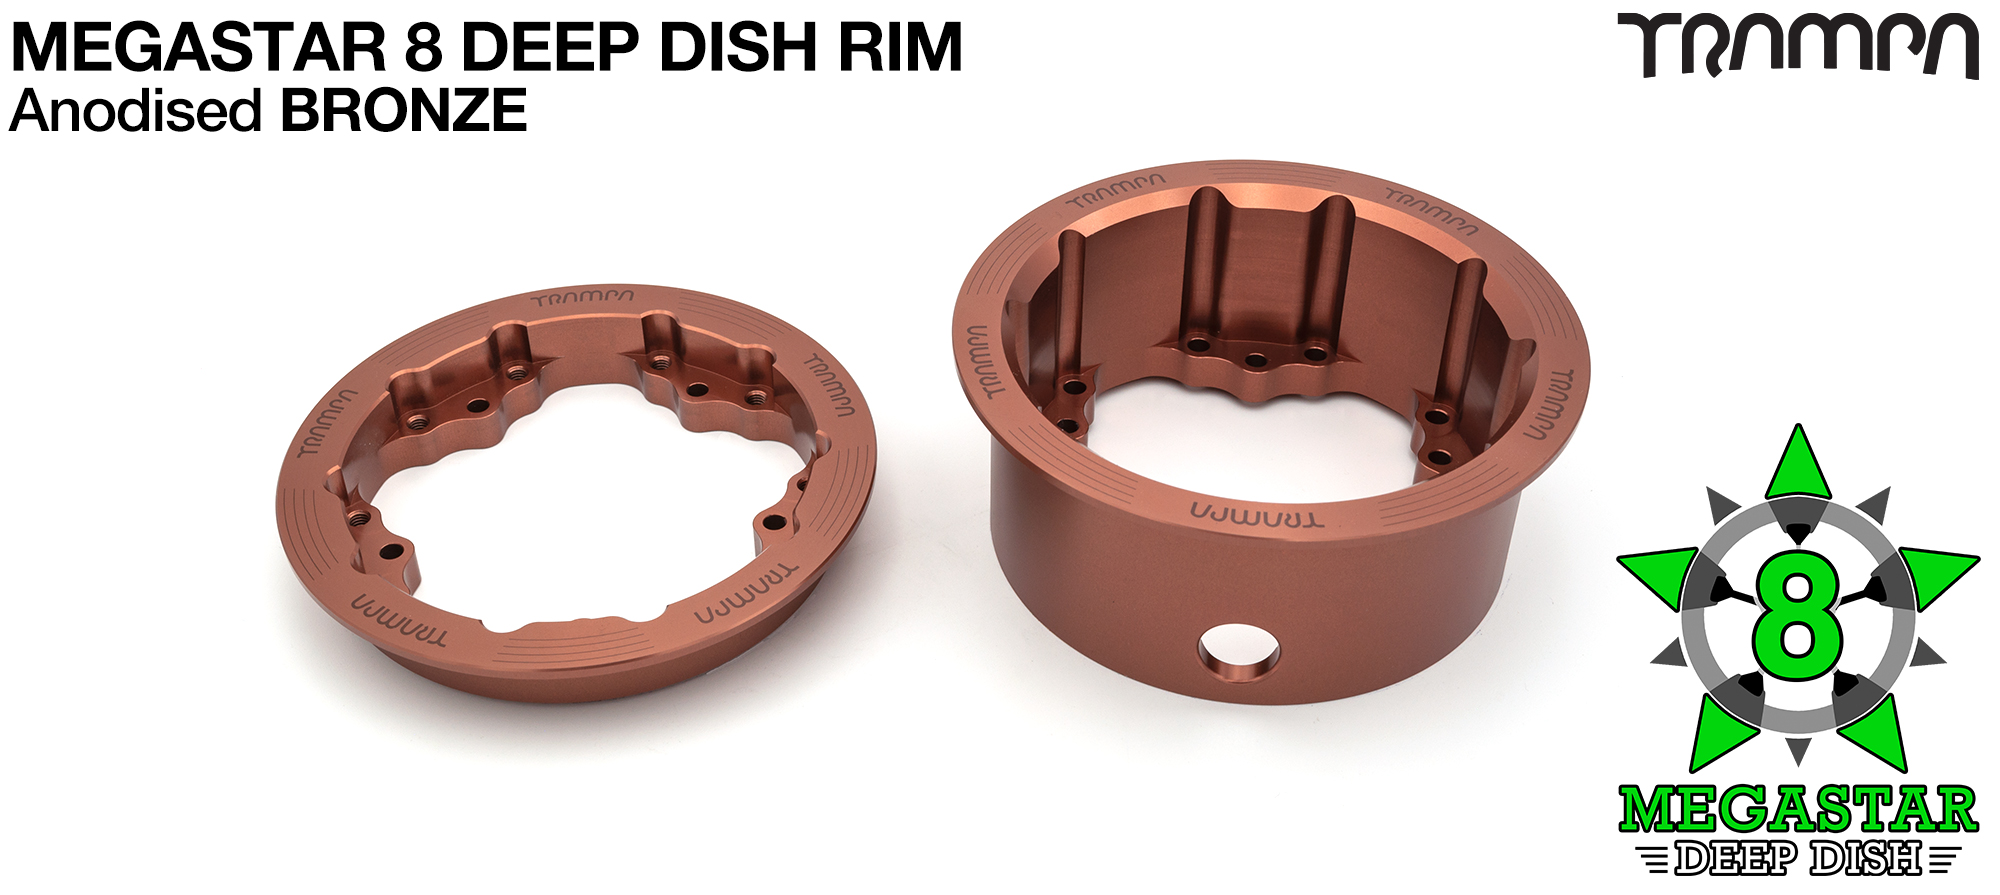 MEGASTAR 8 DEEP-DISH Rims Measure 3.75 x 2.5 Inch. The bearings are positioned OFF-SET widening the wheel base & accept all 3.75 Rim Tyres - BRONZE